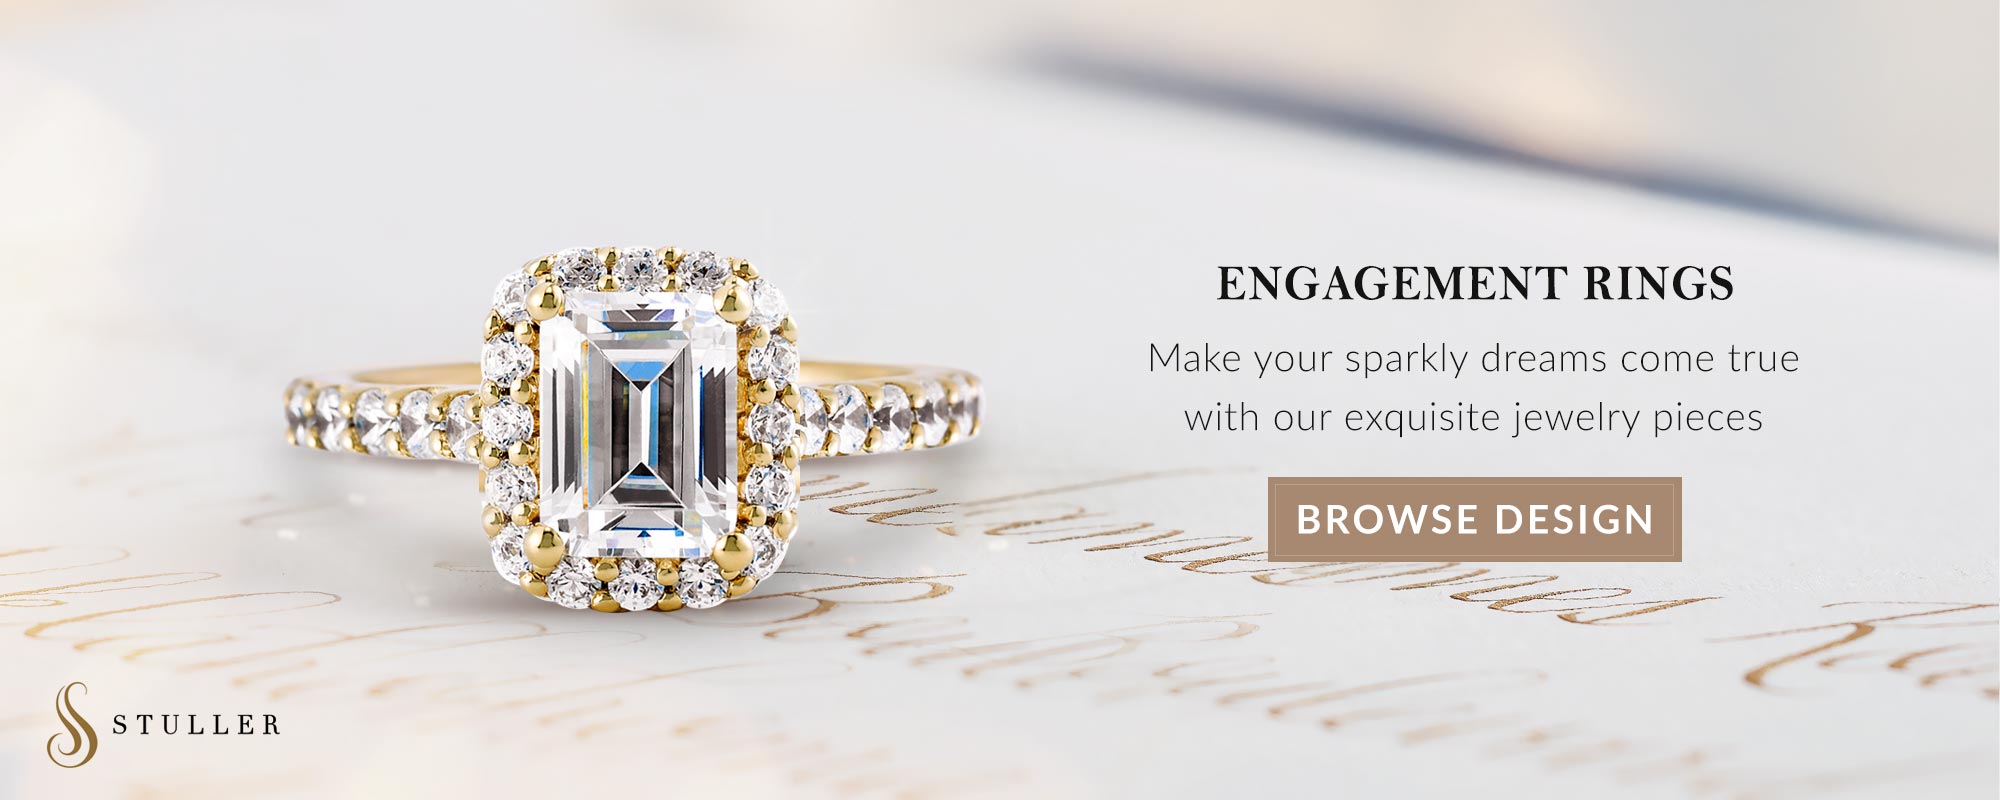 Stuller Engagement Rings at Quality Jewelers